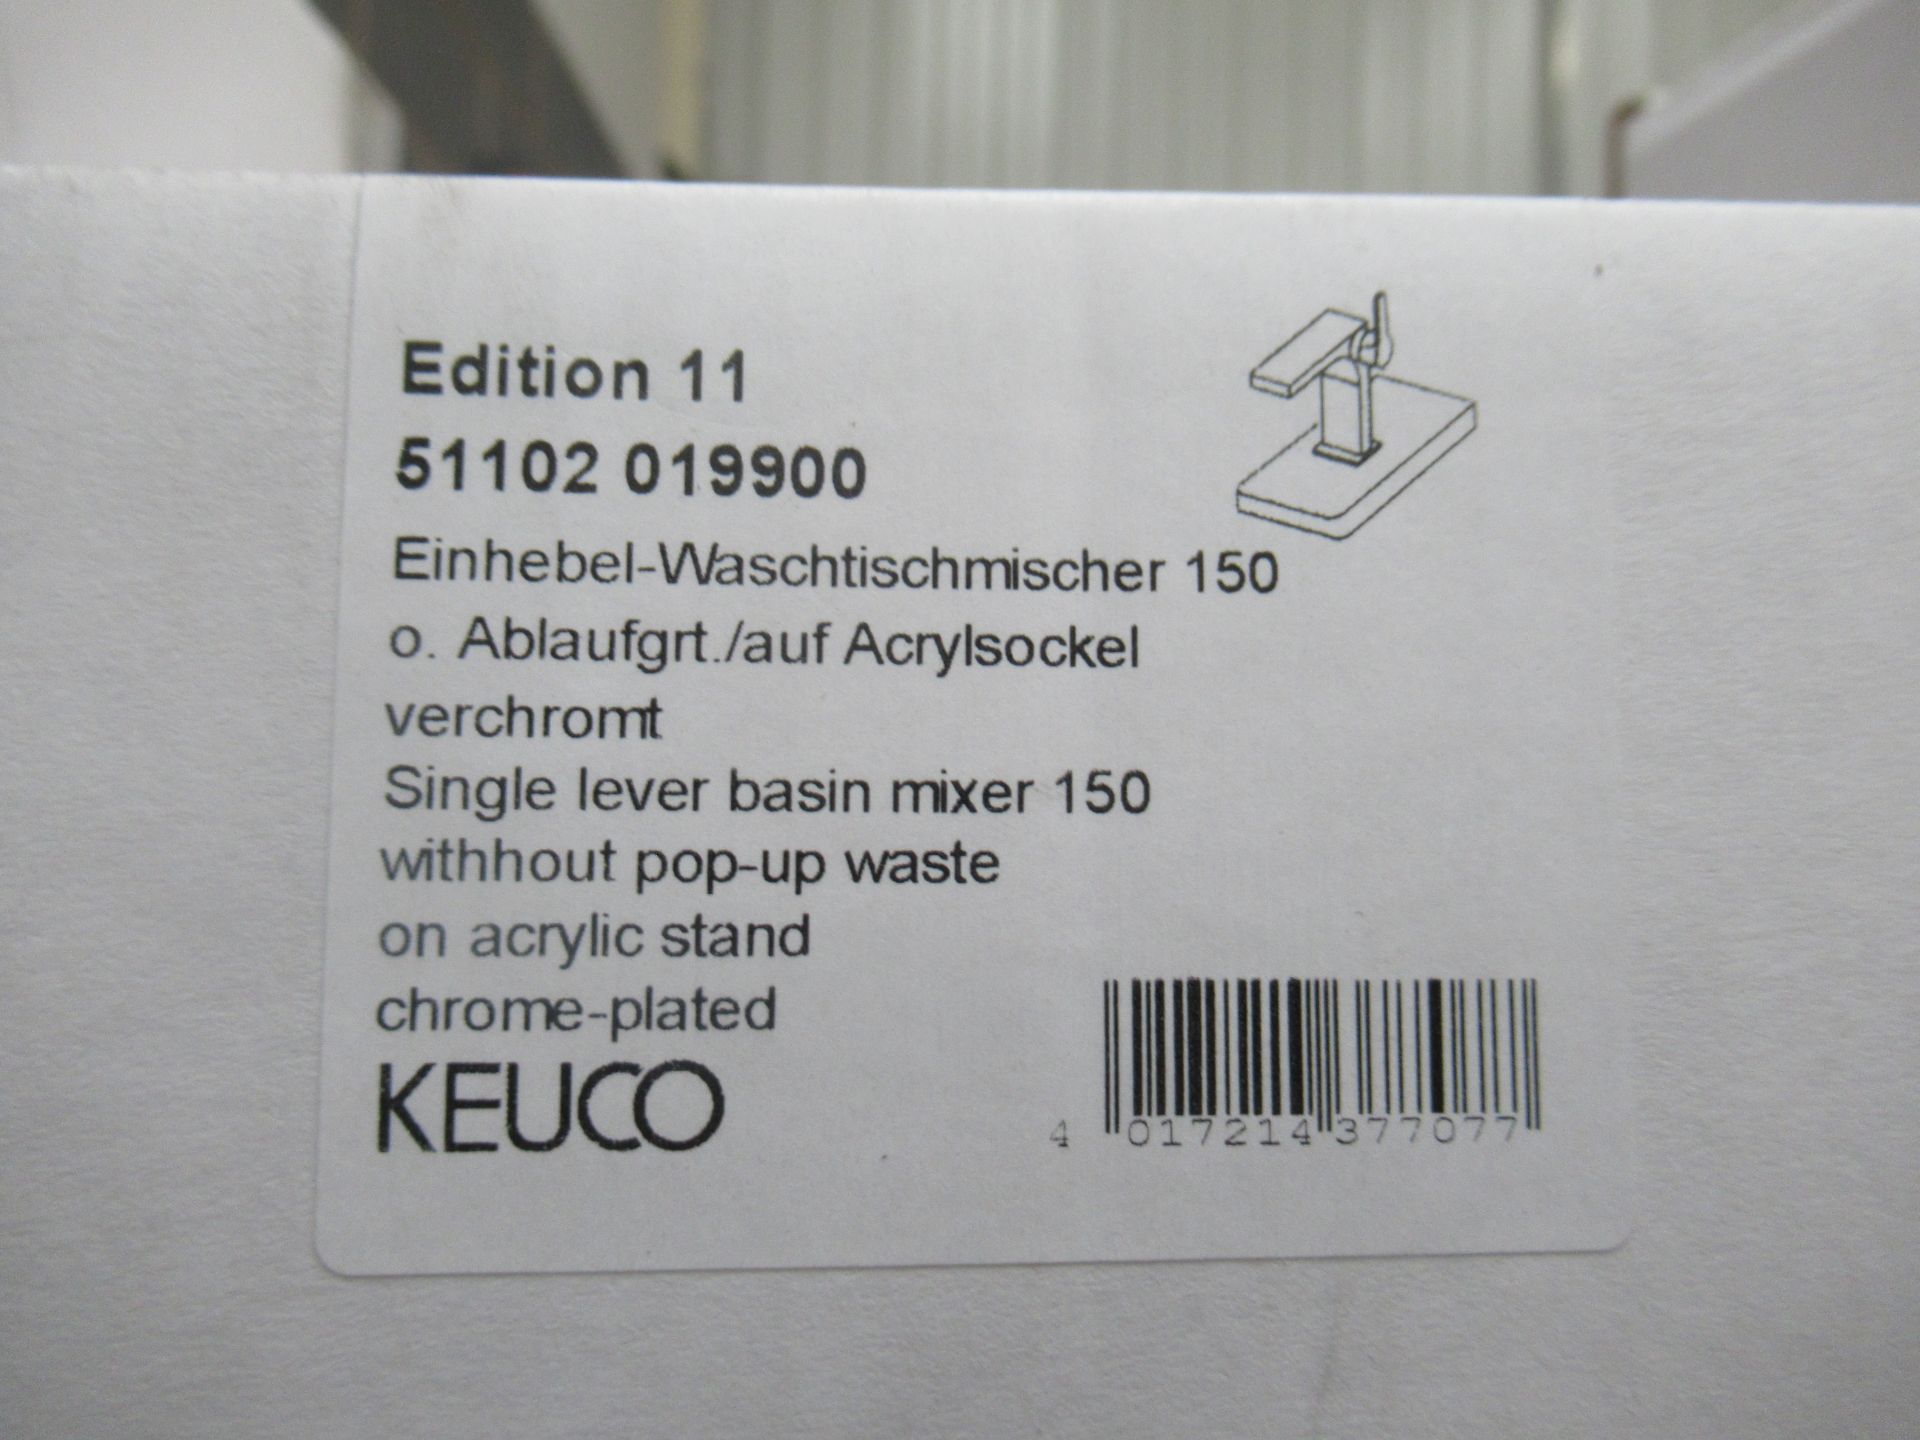 A Keuco Edition II Single Lever Basin Mixer 150-Tap, Chrome Plated, P/N 51102-019900 - Image 2 of 3